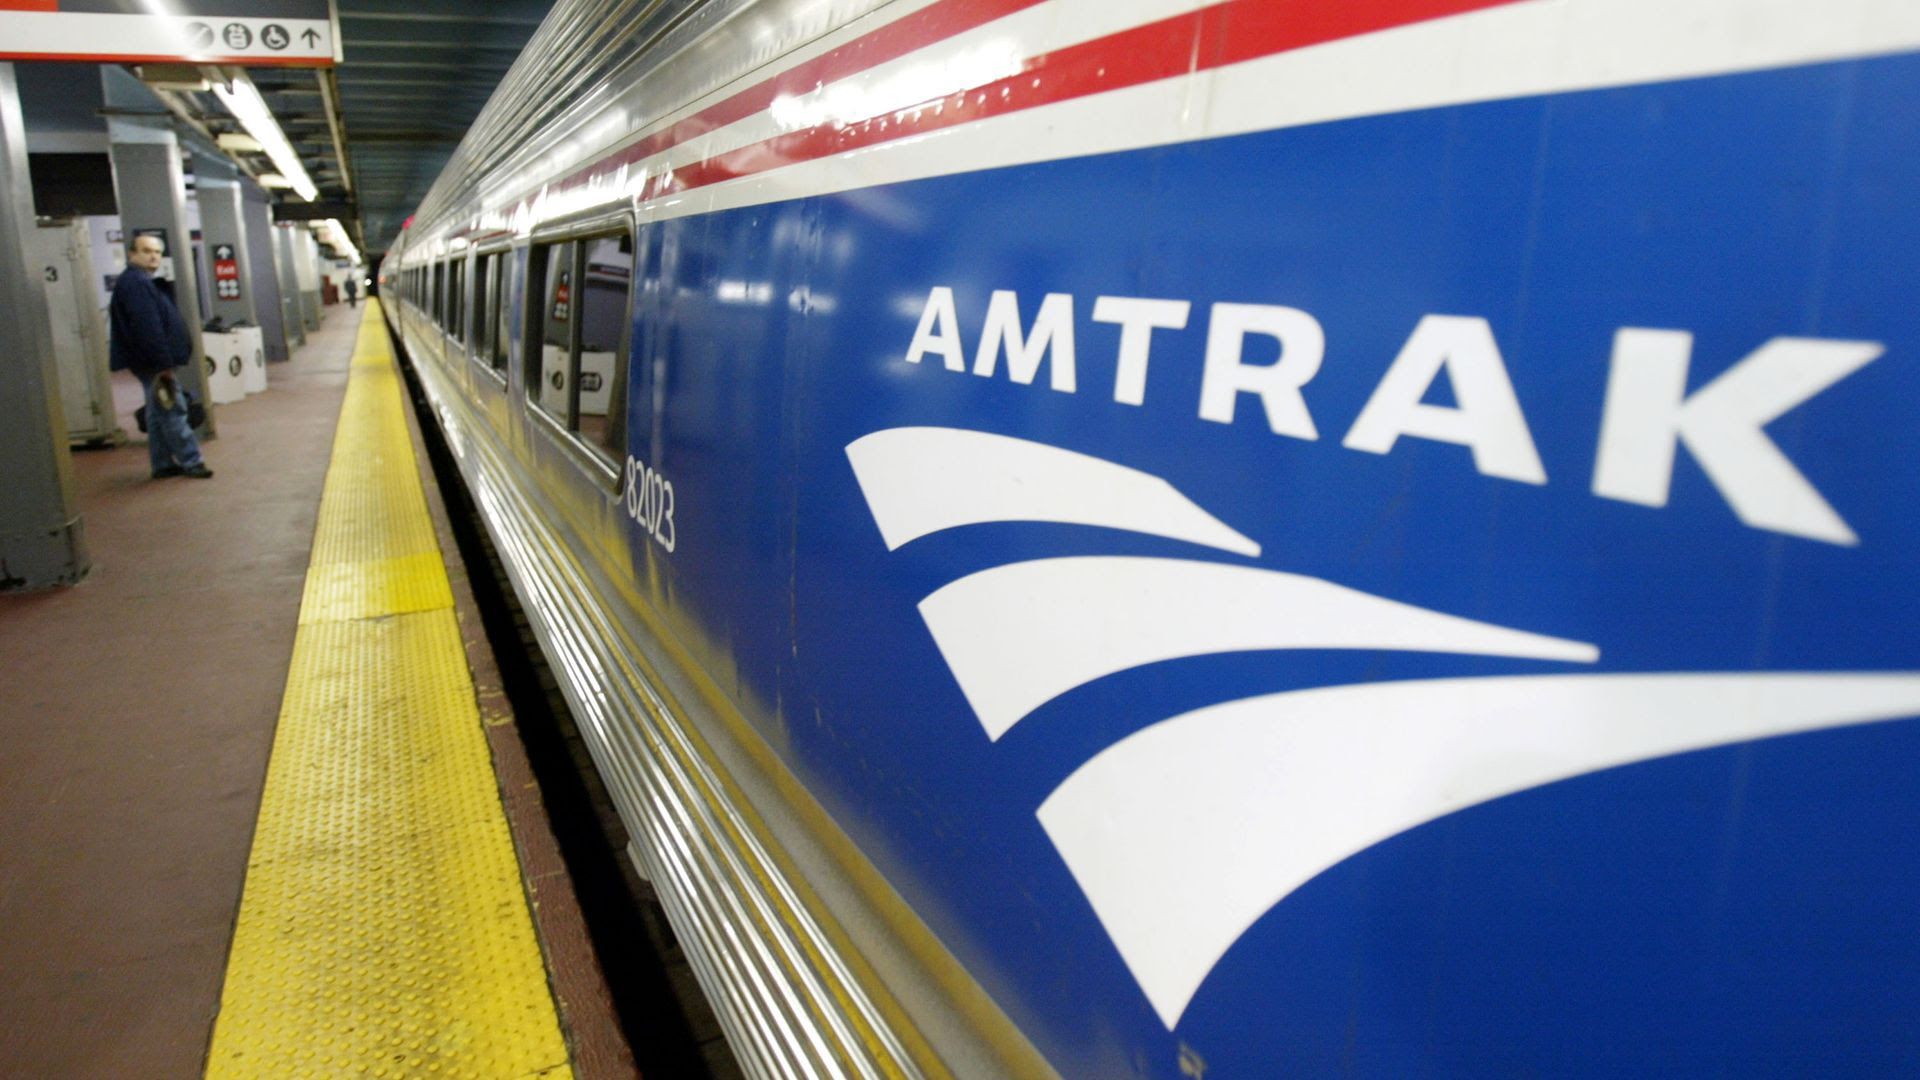 Amtrak train in a station